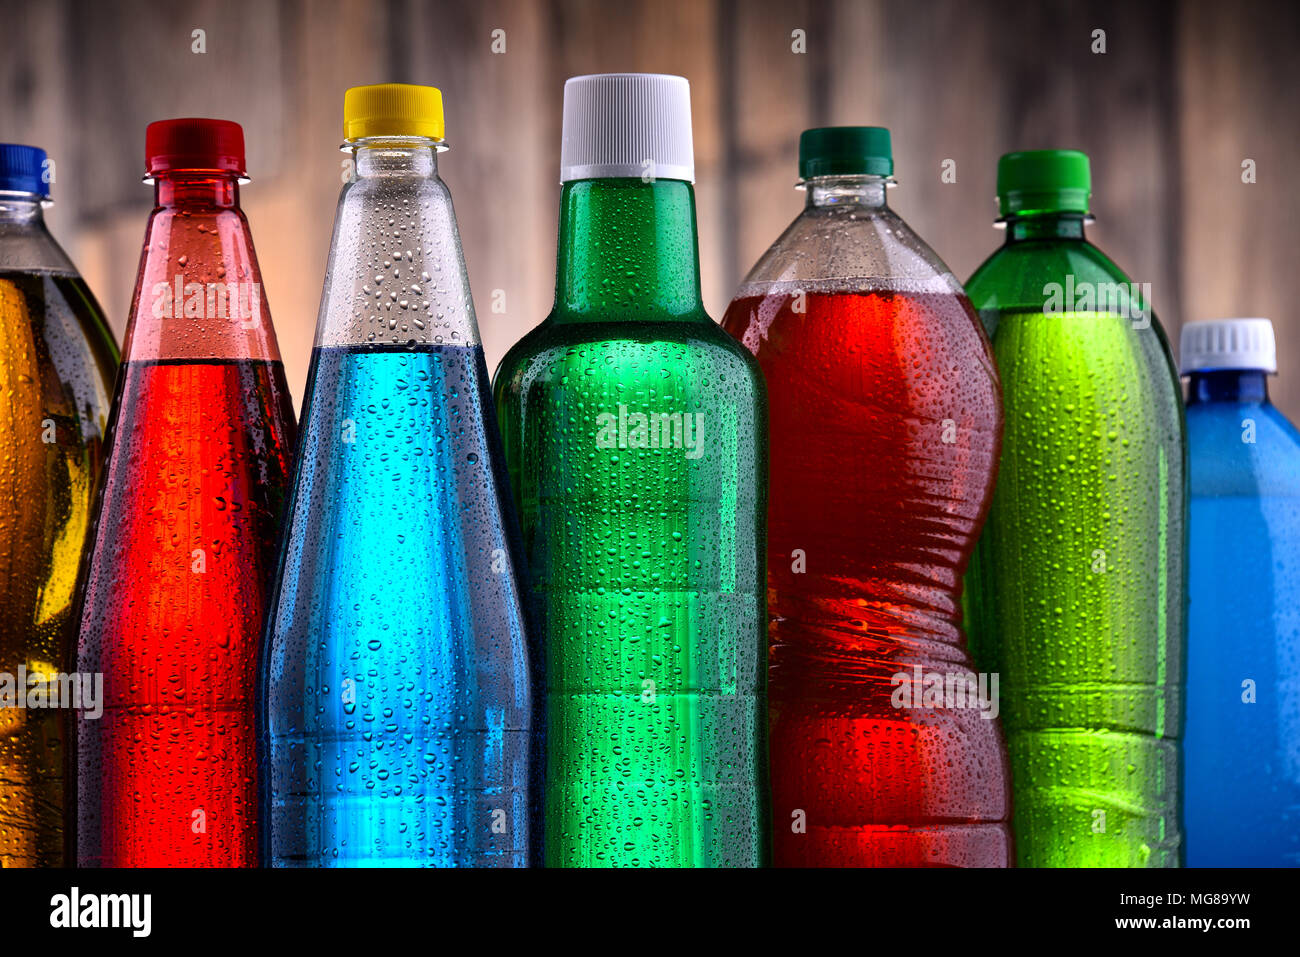 Download Soft Drinks Bottle High Resolution Stock Photography And Images Alamy Yellowimages Mockups